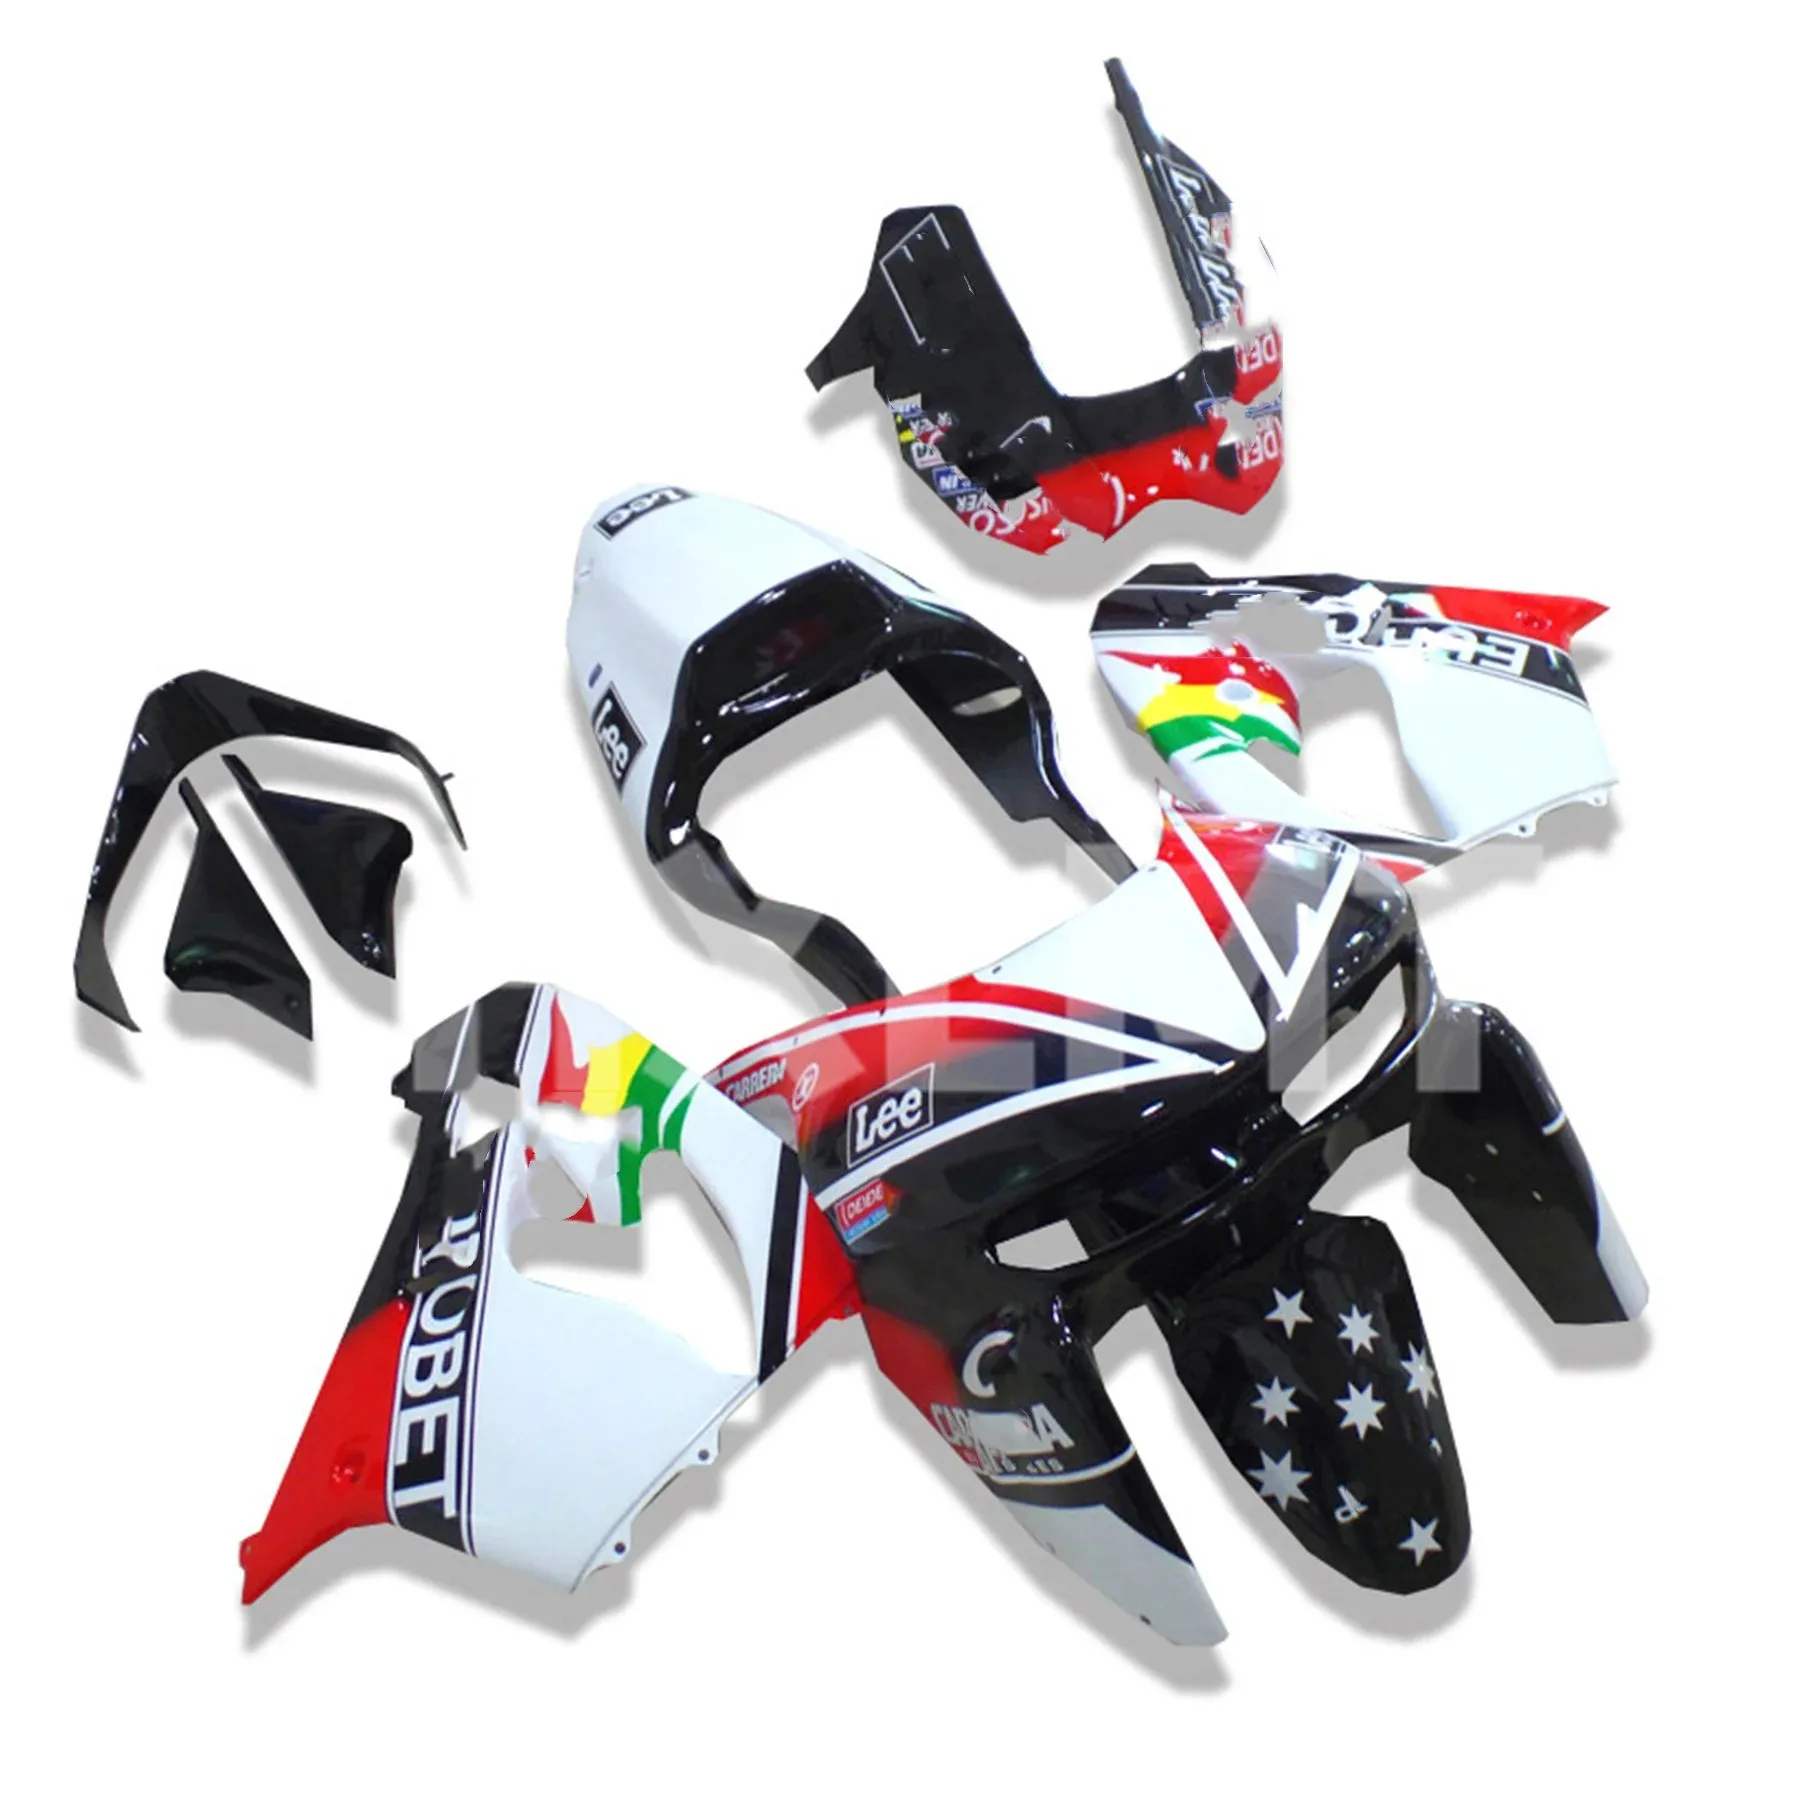 

Motorcycle Fairing Kit For KAWASAKI Ninja ZX9R 01 02 ZX 9R 2000 2001 2002 ABS TOP Red Silver Bodywork Set Accessories